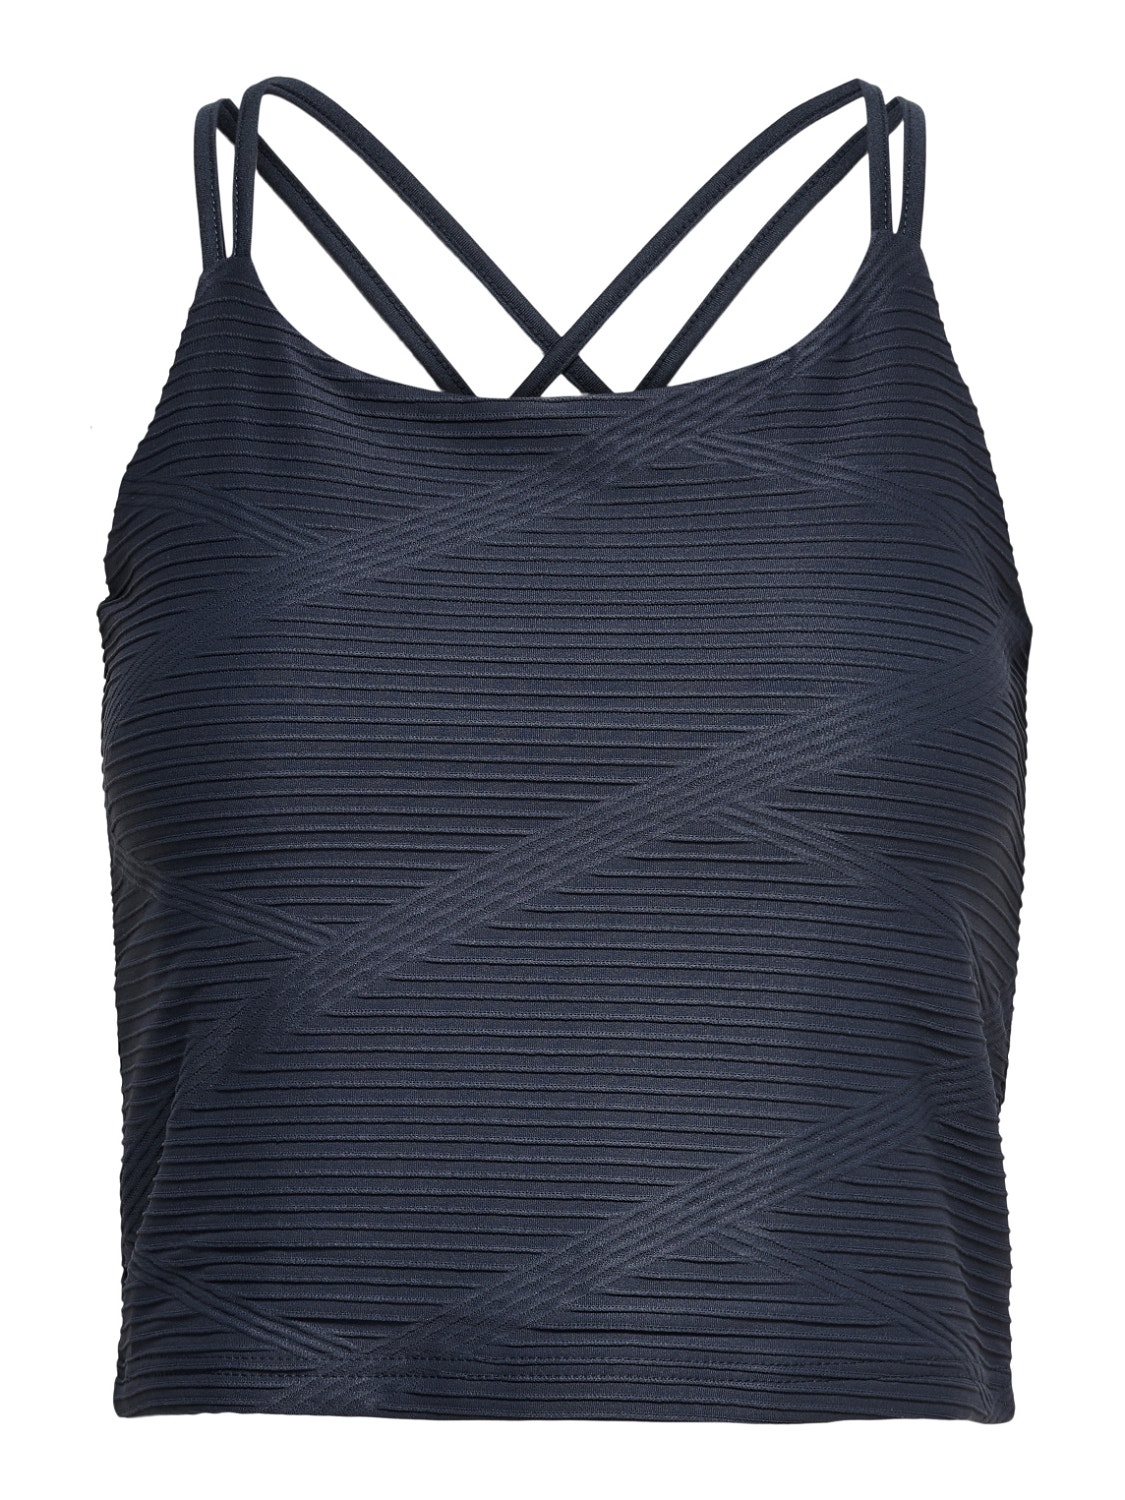 ONLY Strap detailed Training Top -Blue Nights - 15253857